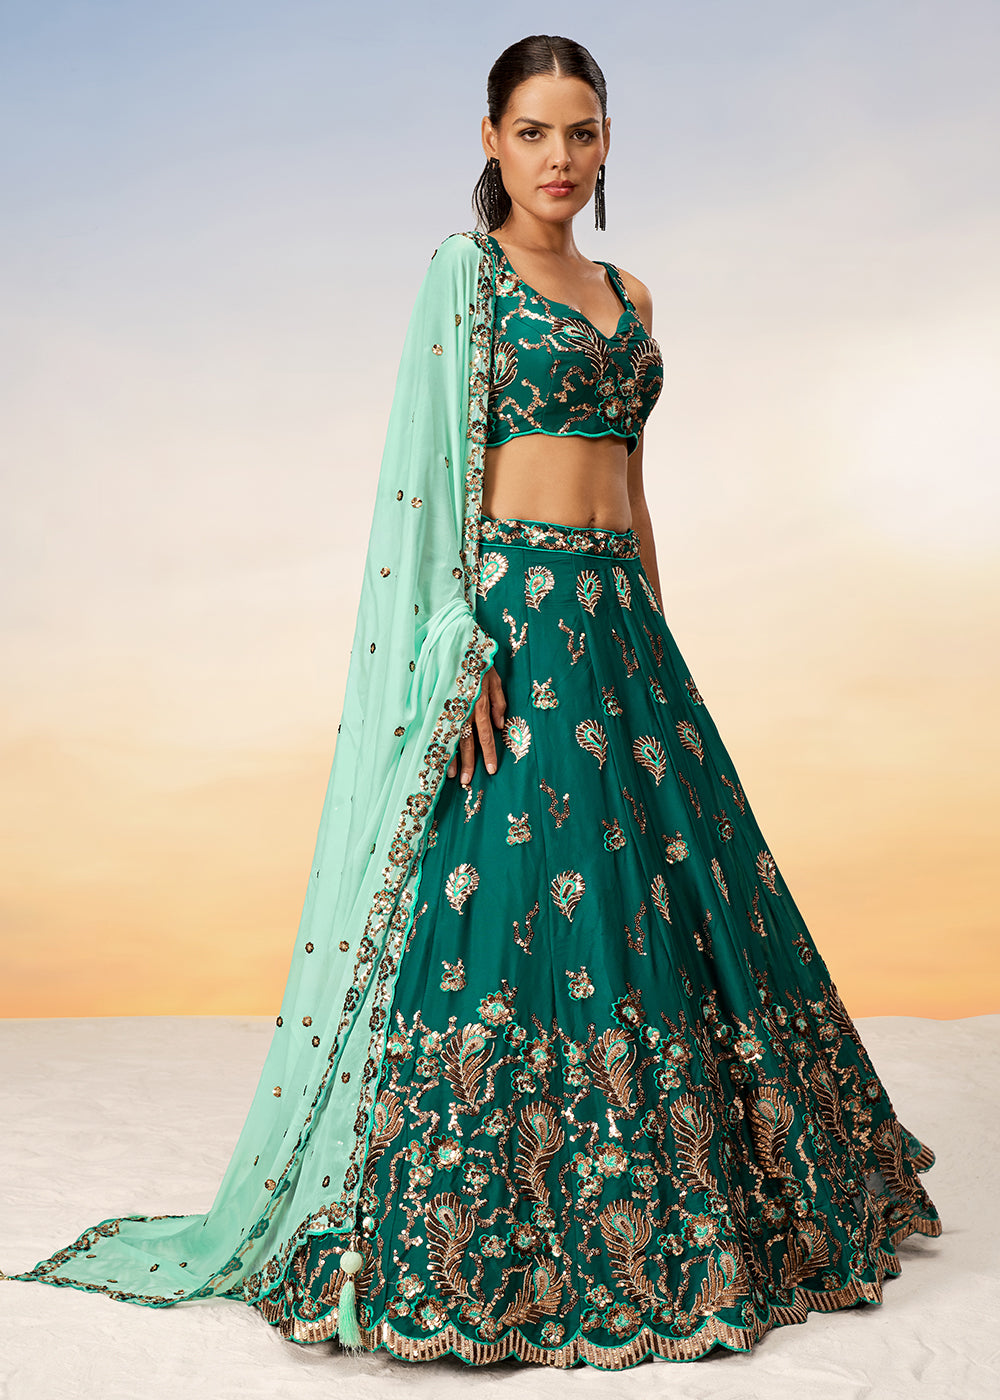 Buy Now Pretty Green Sequins Embroidered Designer Lehenga Choli Online in USA, UK, Canada & Worldwide at Empress Clothing.